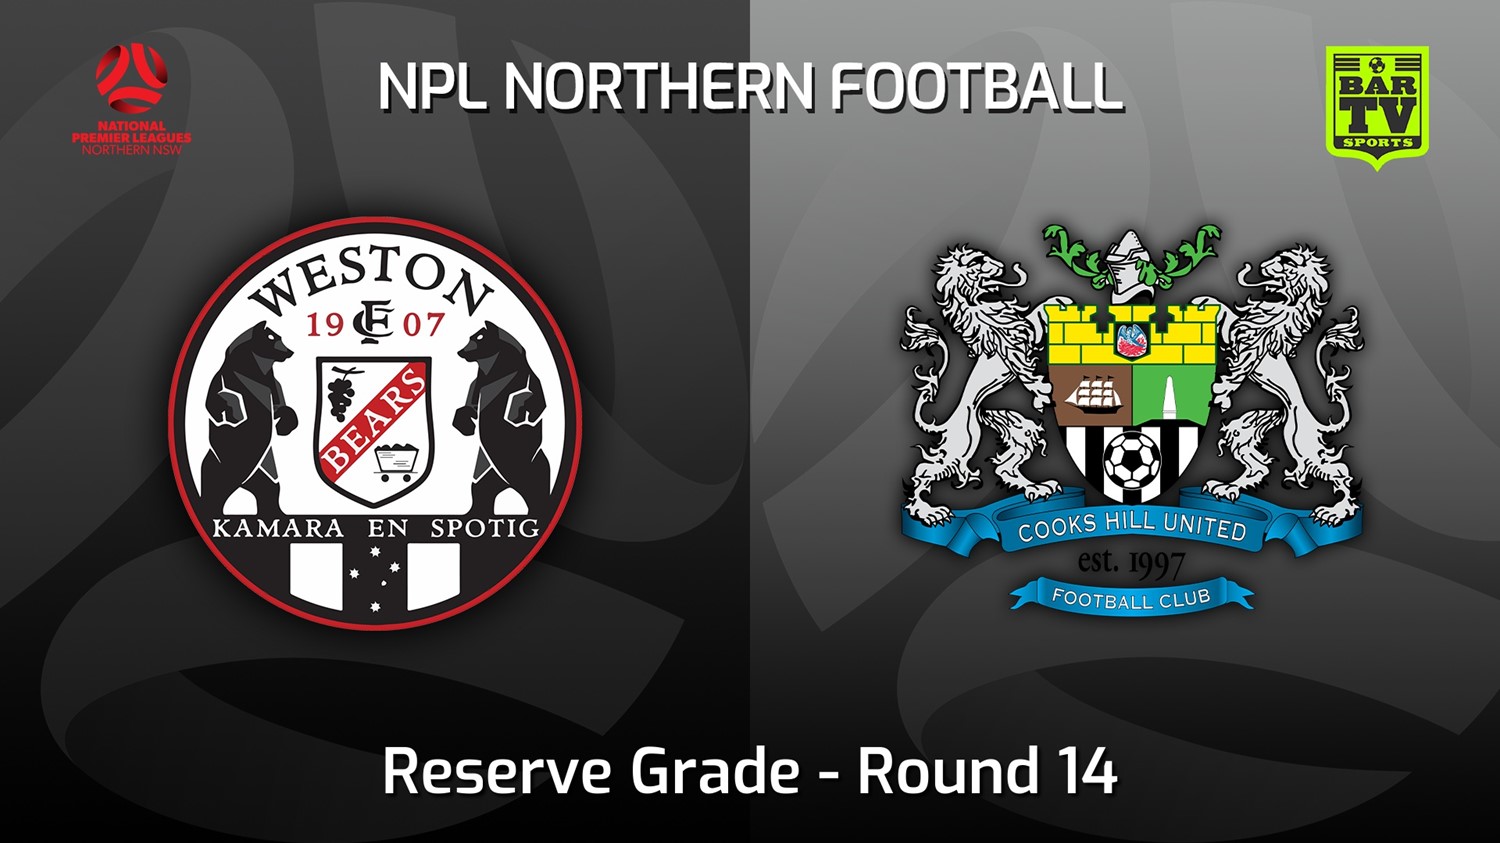 220612-NNSW NPLM Res Round 14 - Weston Workers FC Res v Cooks Hill United FC (Res) Slate Image